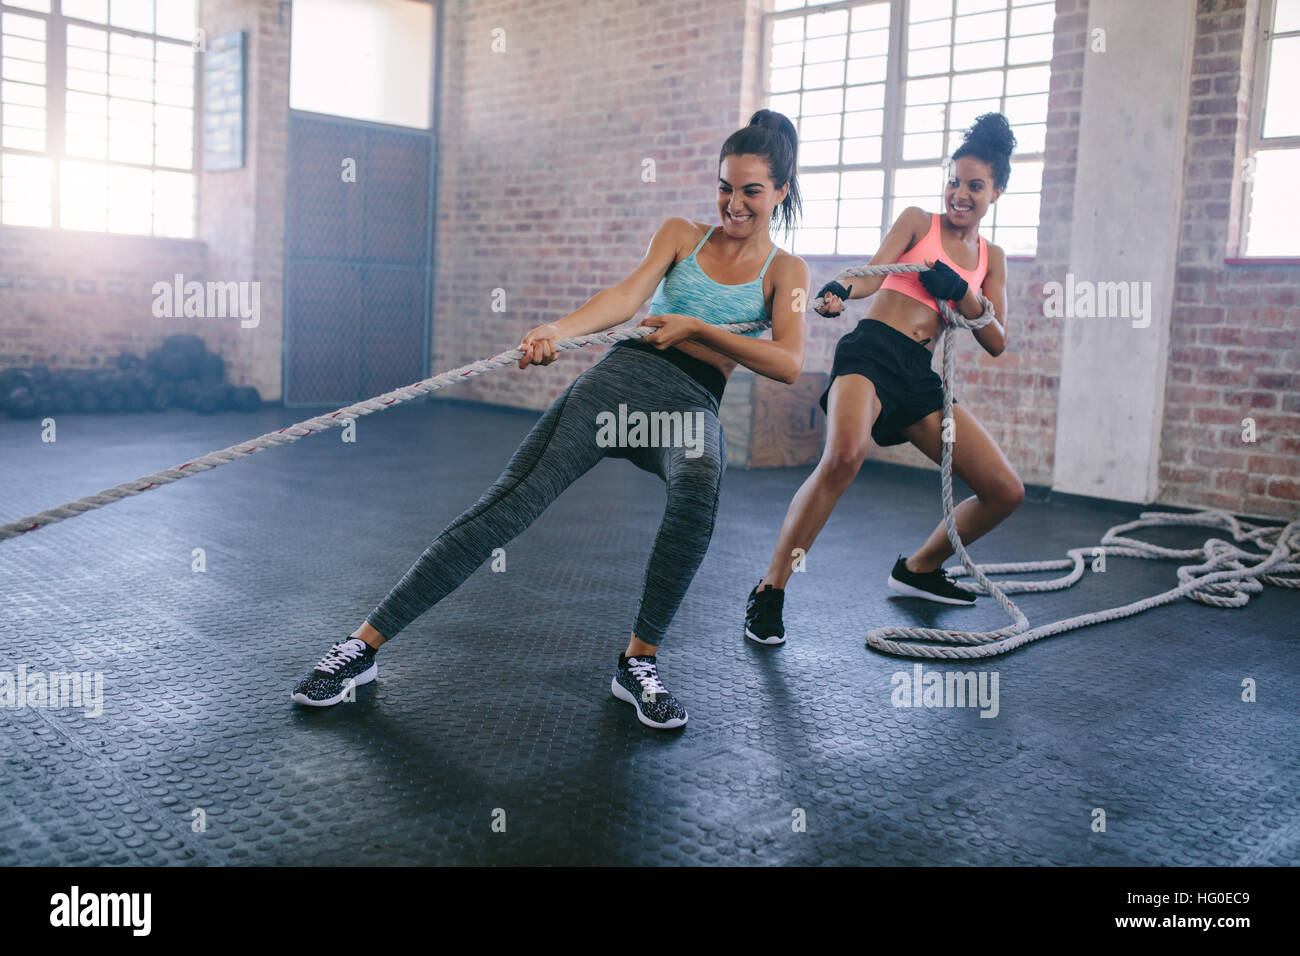 Shot of two strong young women doing rope pulling exercises at a gym. Fitness females pulling rope at gym and smiling. Stock Photo